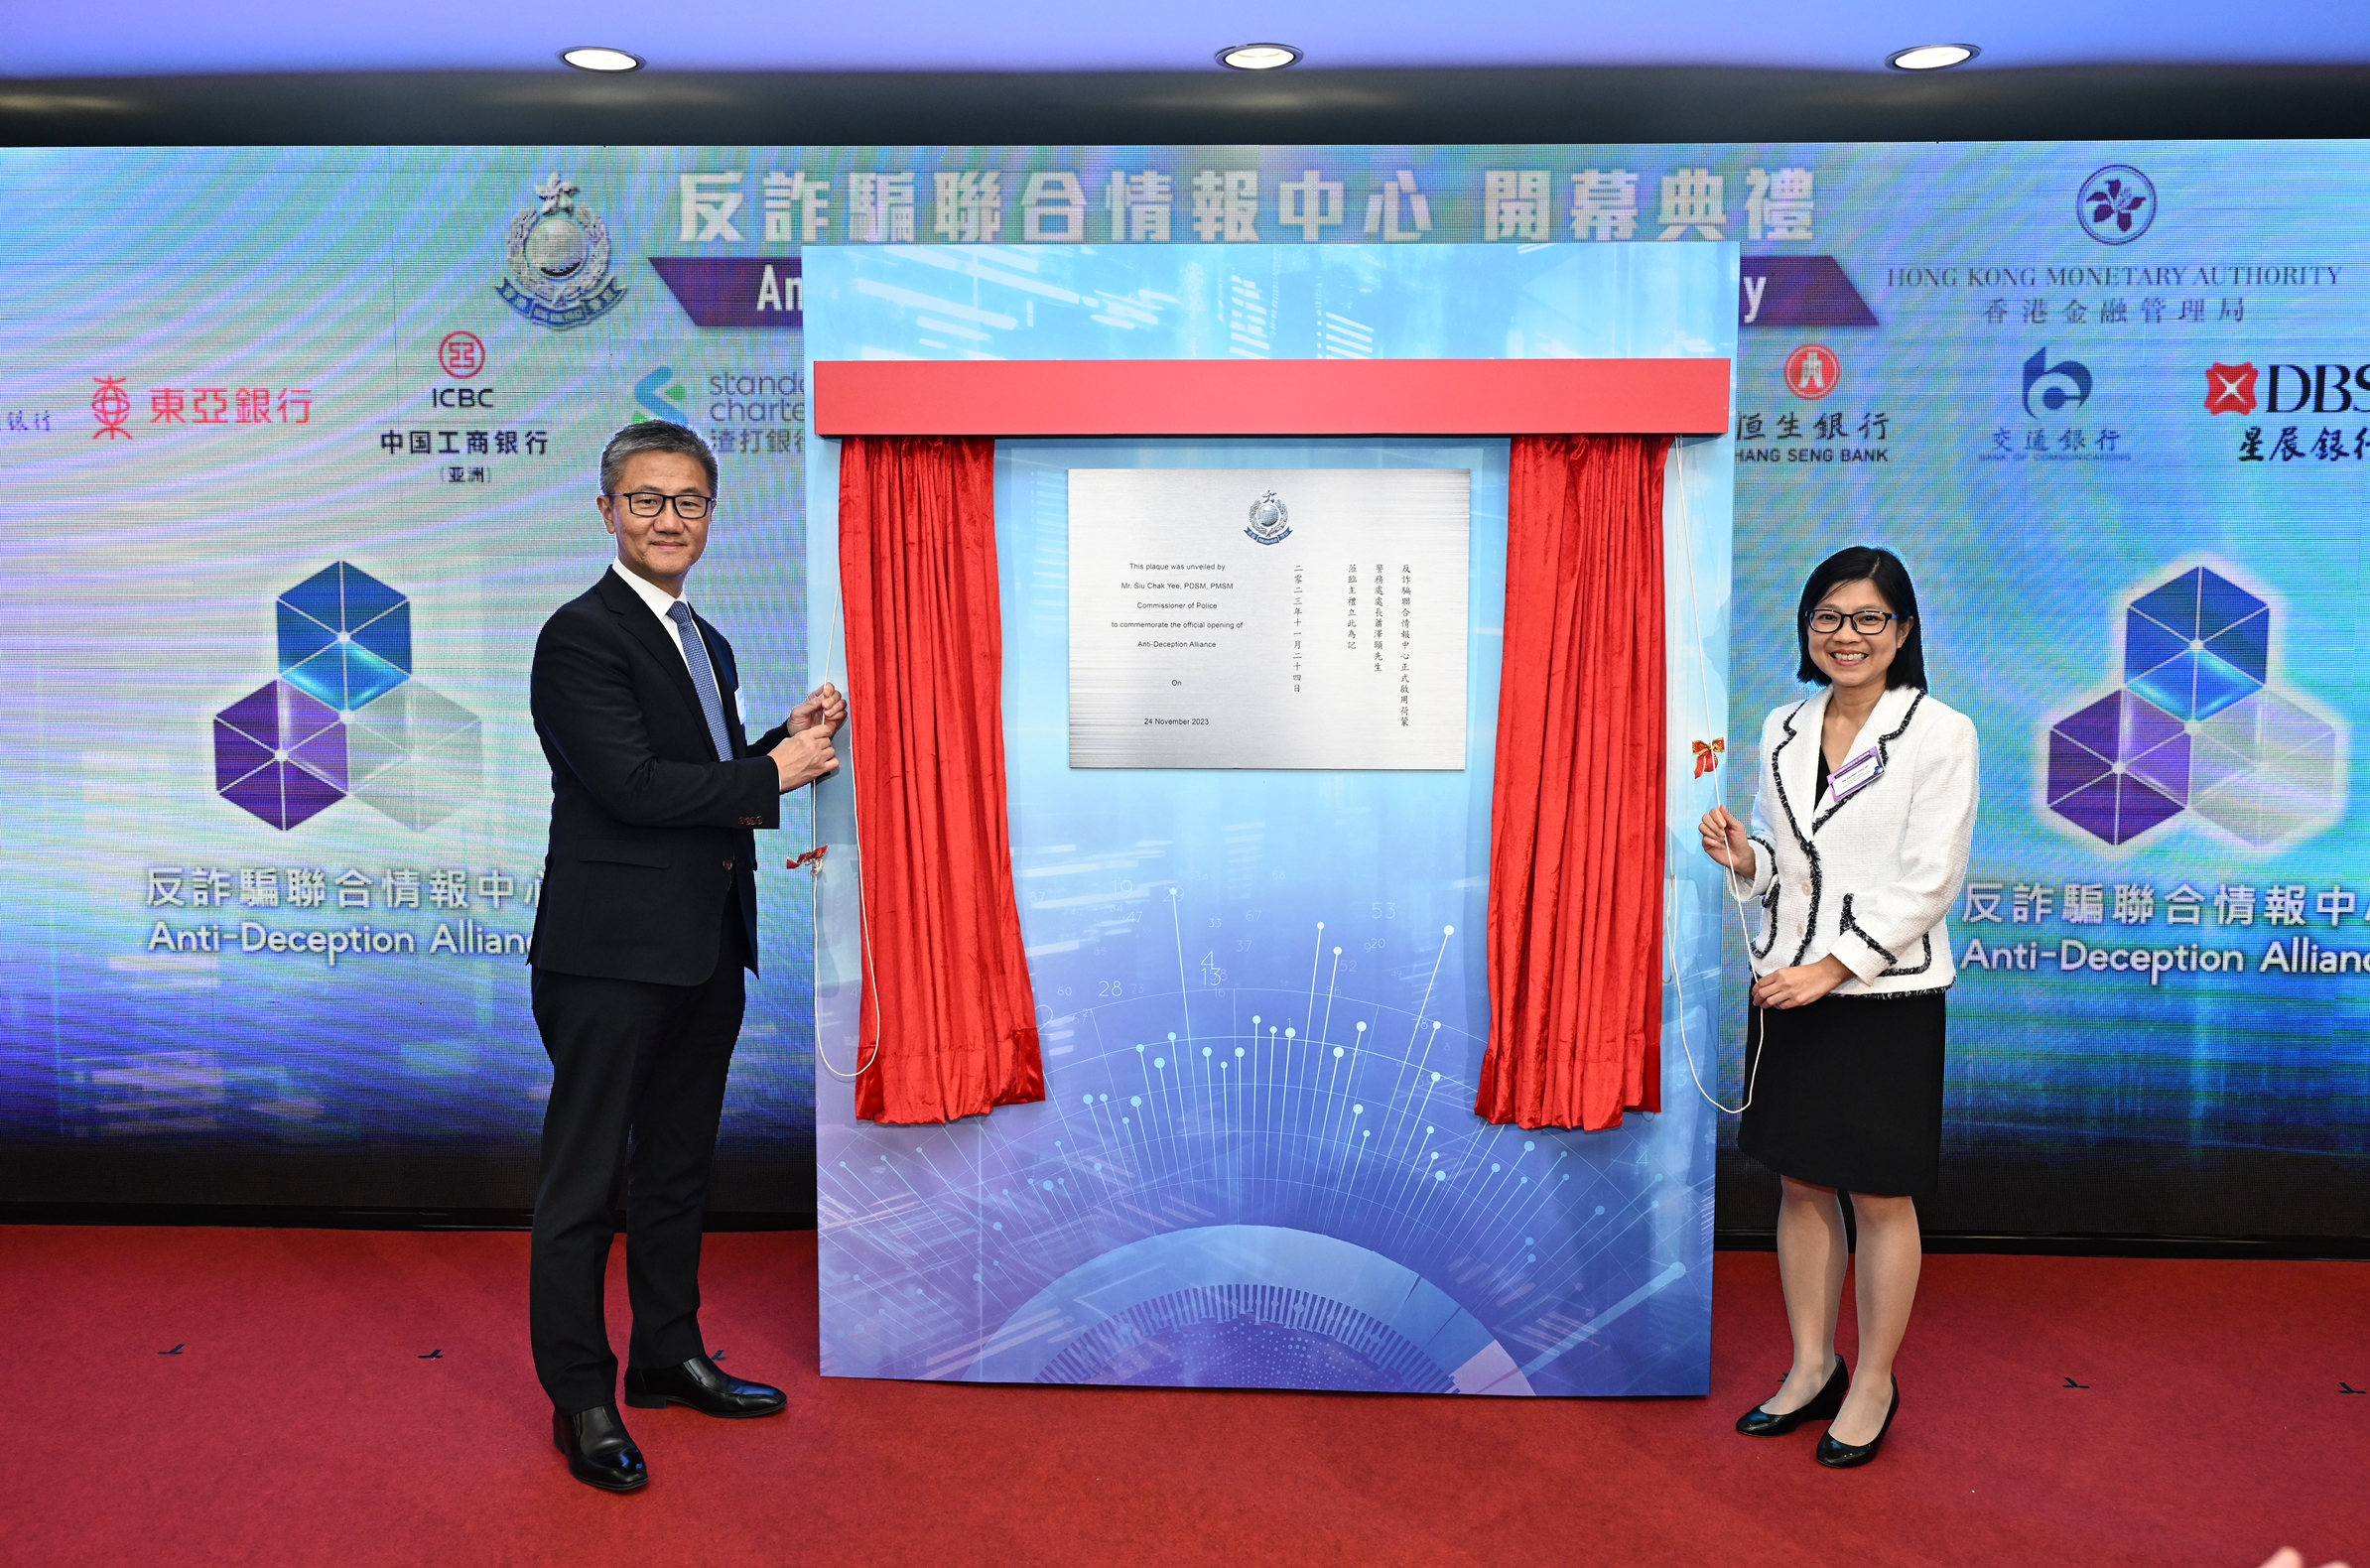 Ms Carmen Chu, Executive Director (Enforcement and AML) of the Hong Kong Monetary Authority (right) and Mr Raymond Siu Chak-yee, Commissioner of Police (left) unveil the plaque of Anti-Deception Alliance.